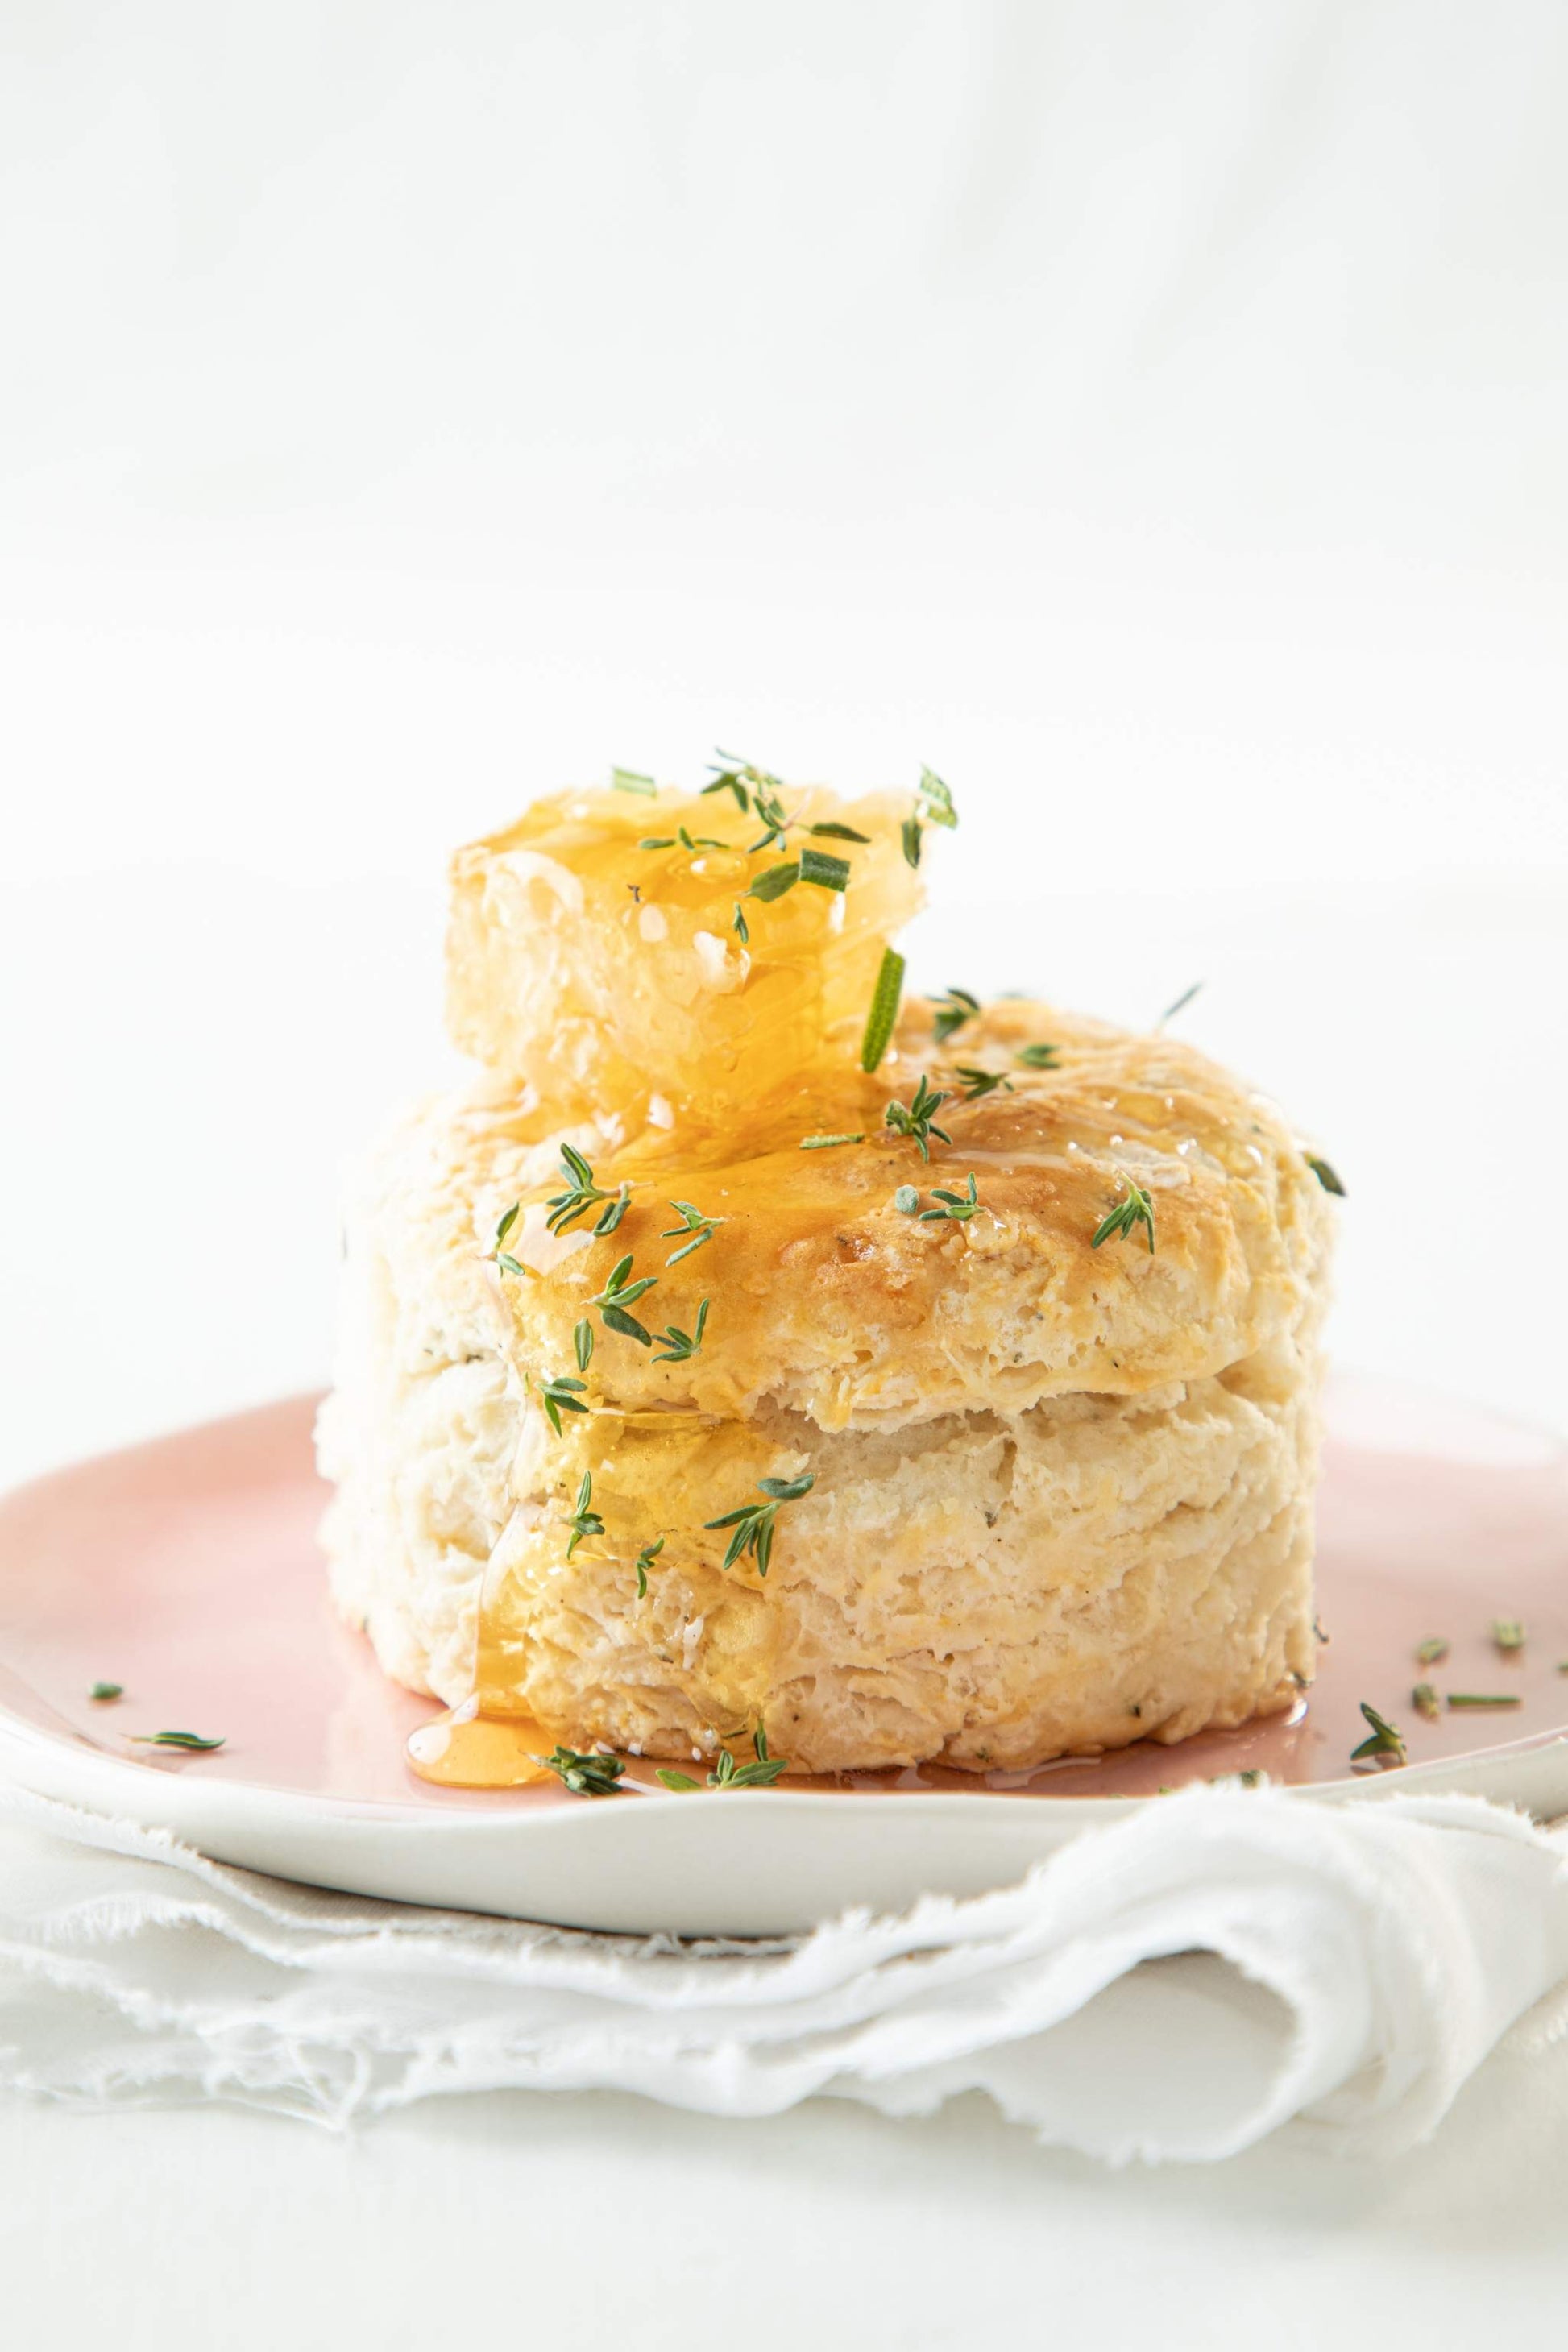 A fluffy biscuit, plated with a sprinkle of rosemary and Acacia Honeycomb on top.